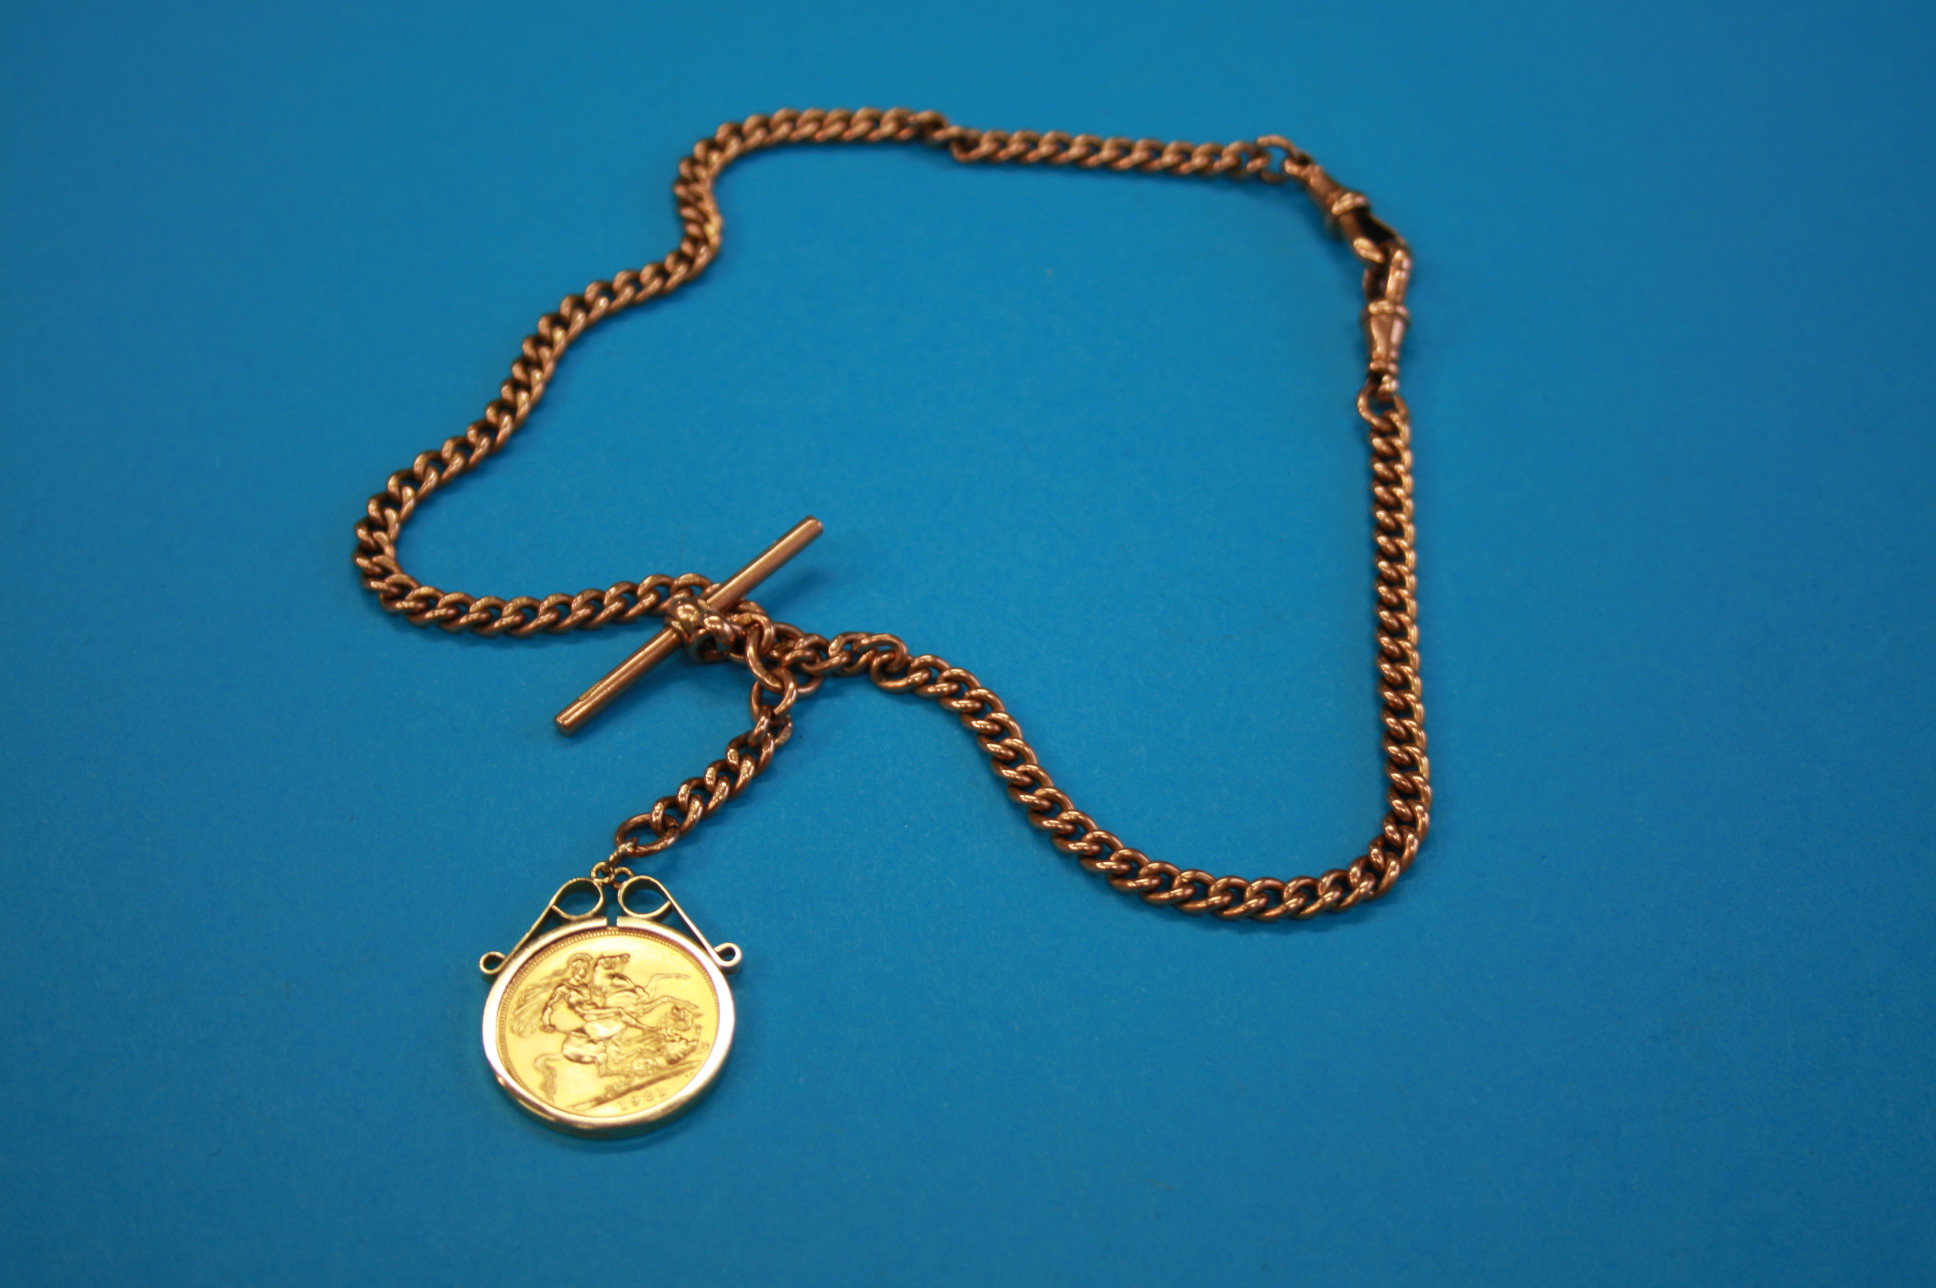 A full sovereign, 22ct gold, weight 8 grams, dated 1981; and a 9ct gold chain, 32.4 grams.